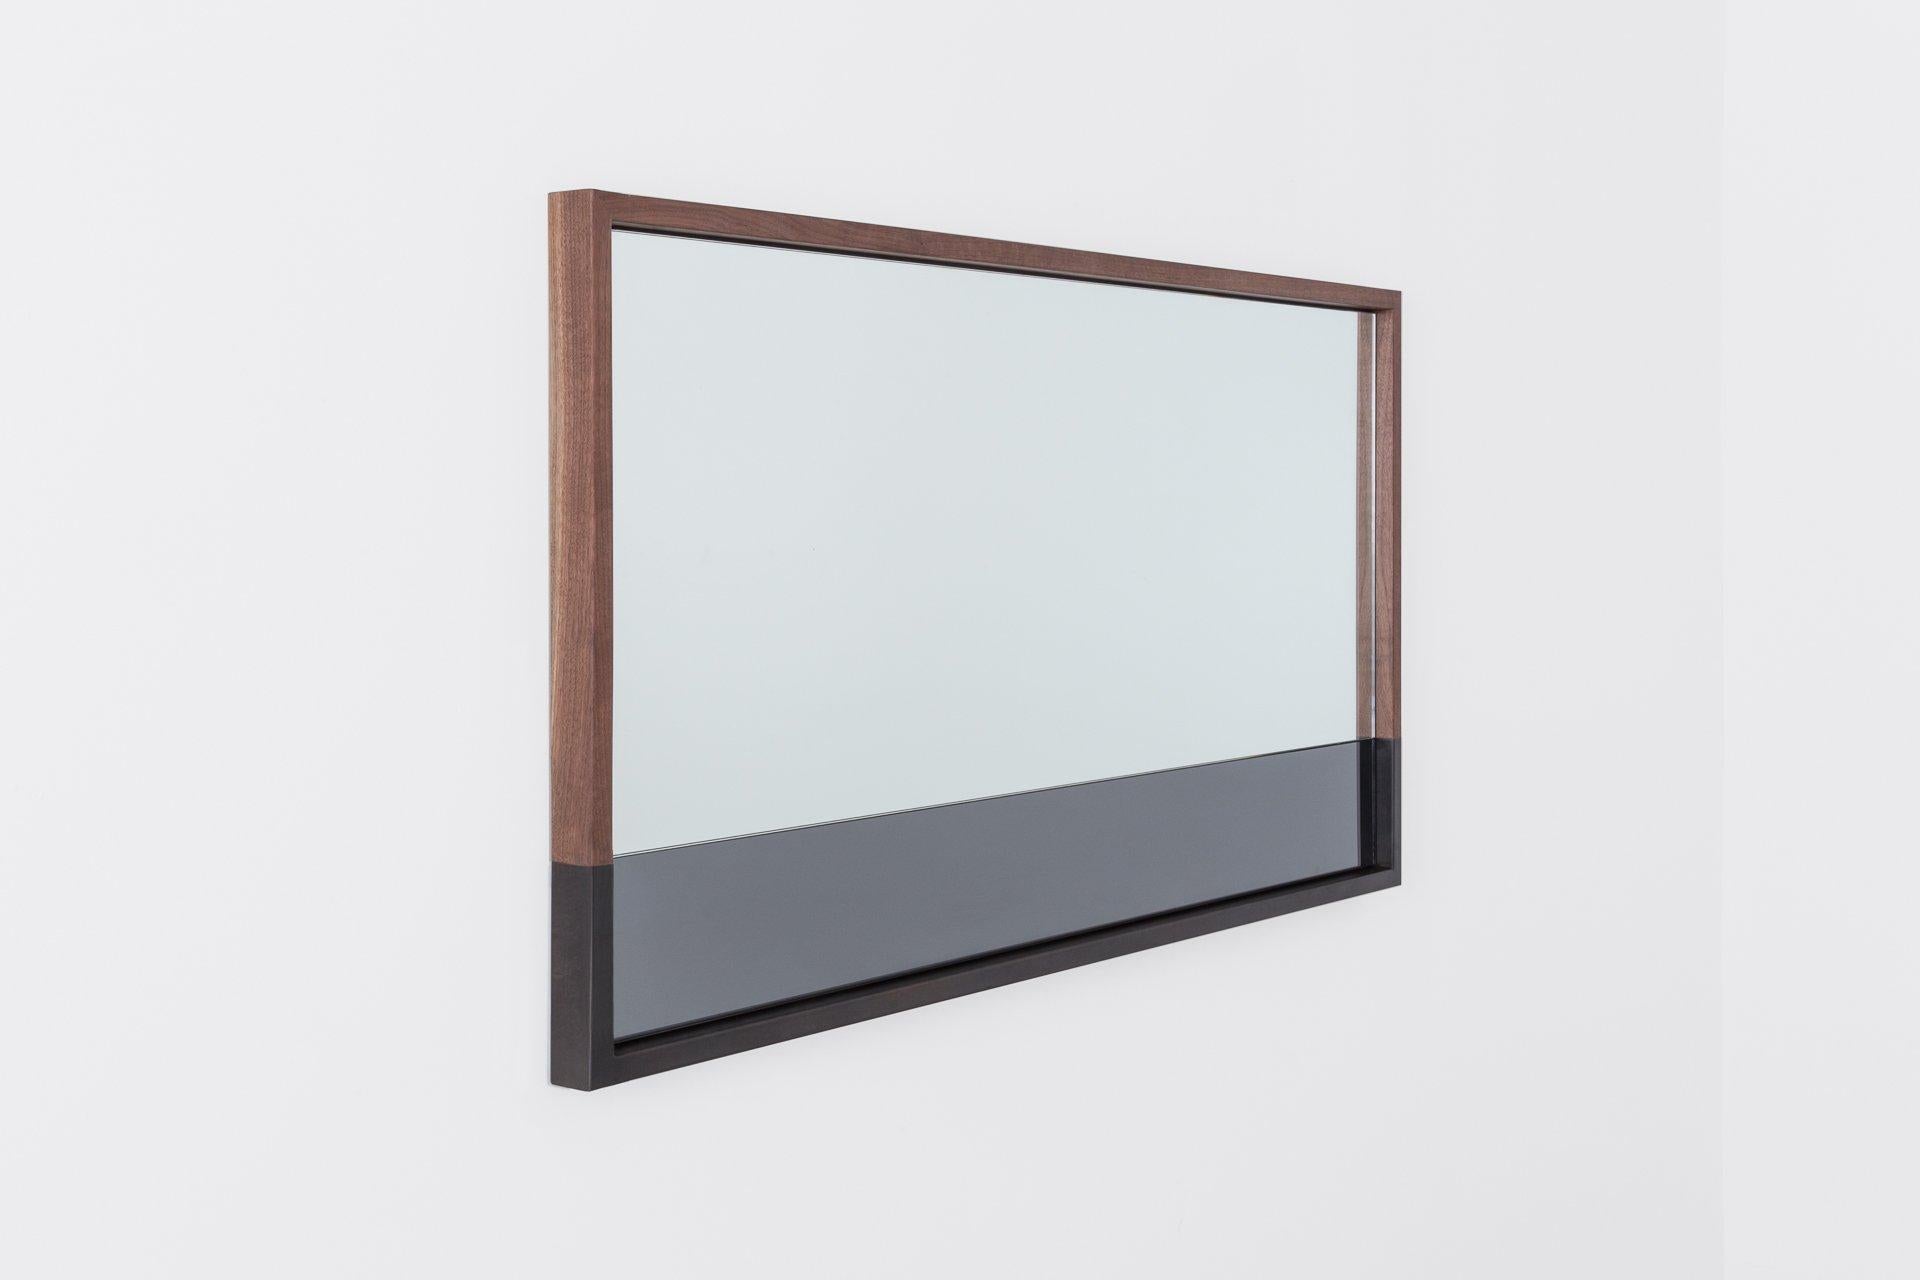 Our Waterline Landscape Mirror shares a story within its form. The elegant transitions of mirror and frame materials echo the calm after a storm. The Waterline Mirror was designed in remembrance of Hurricane Sandy and its aftermath on our hard-hit